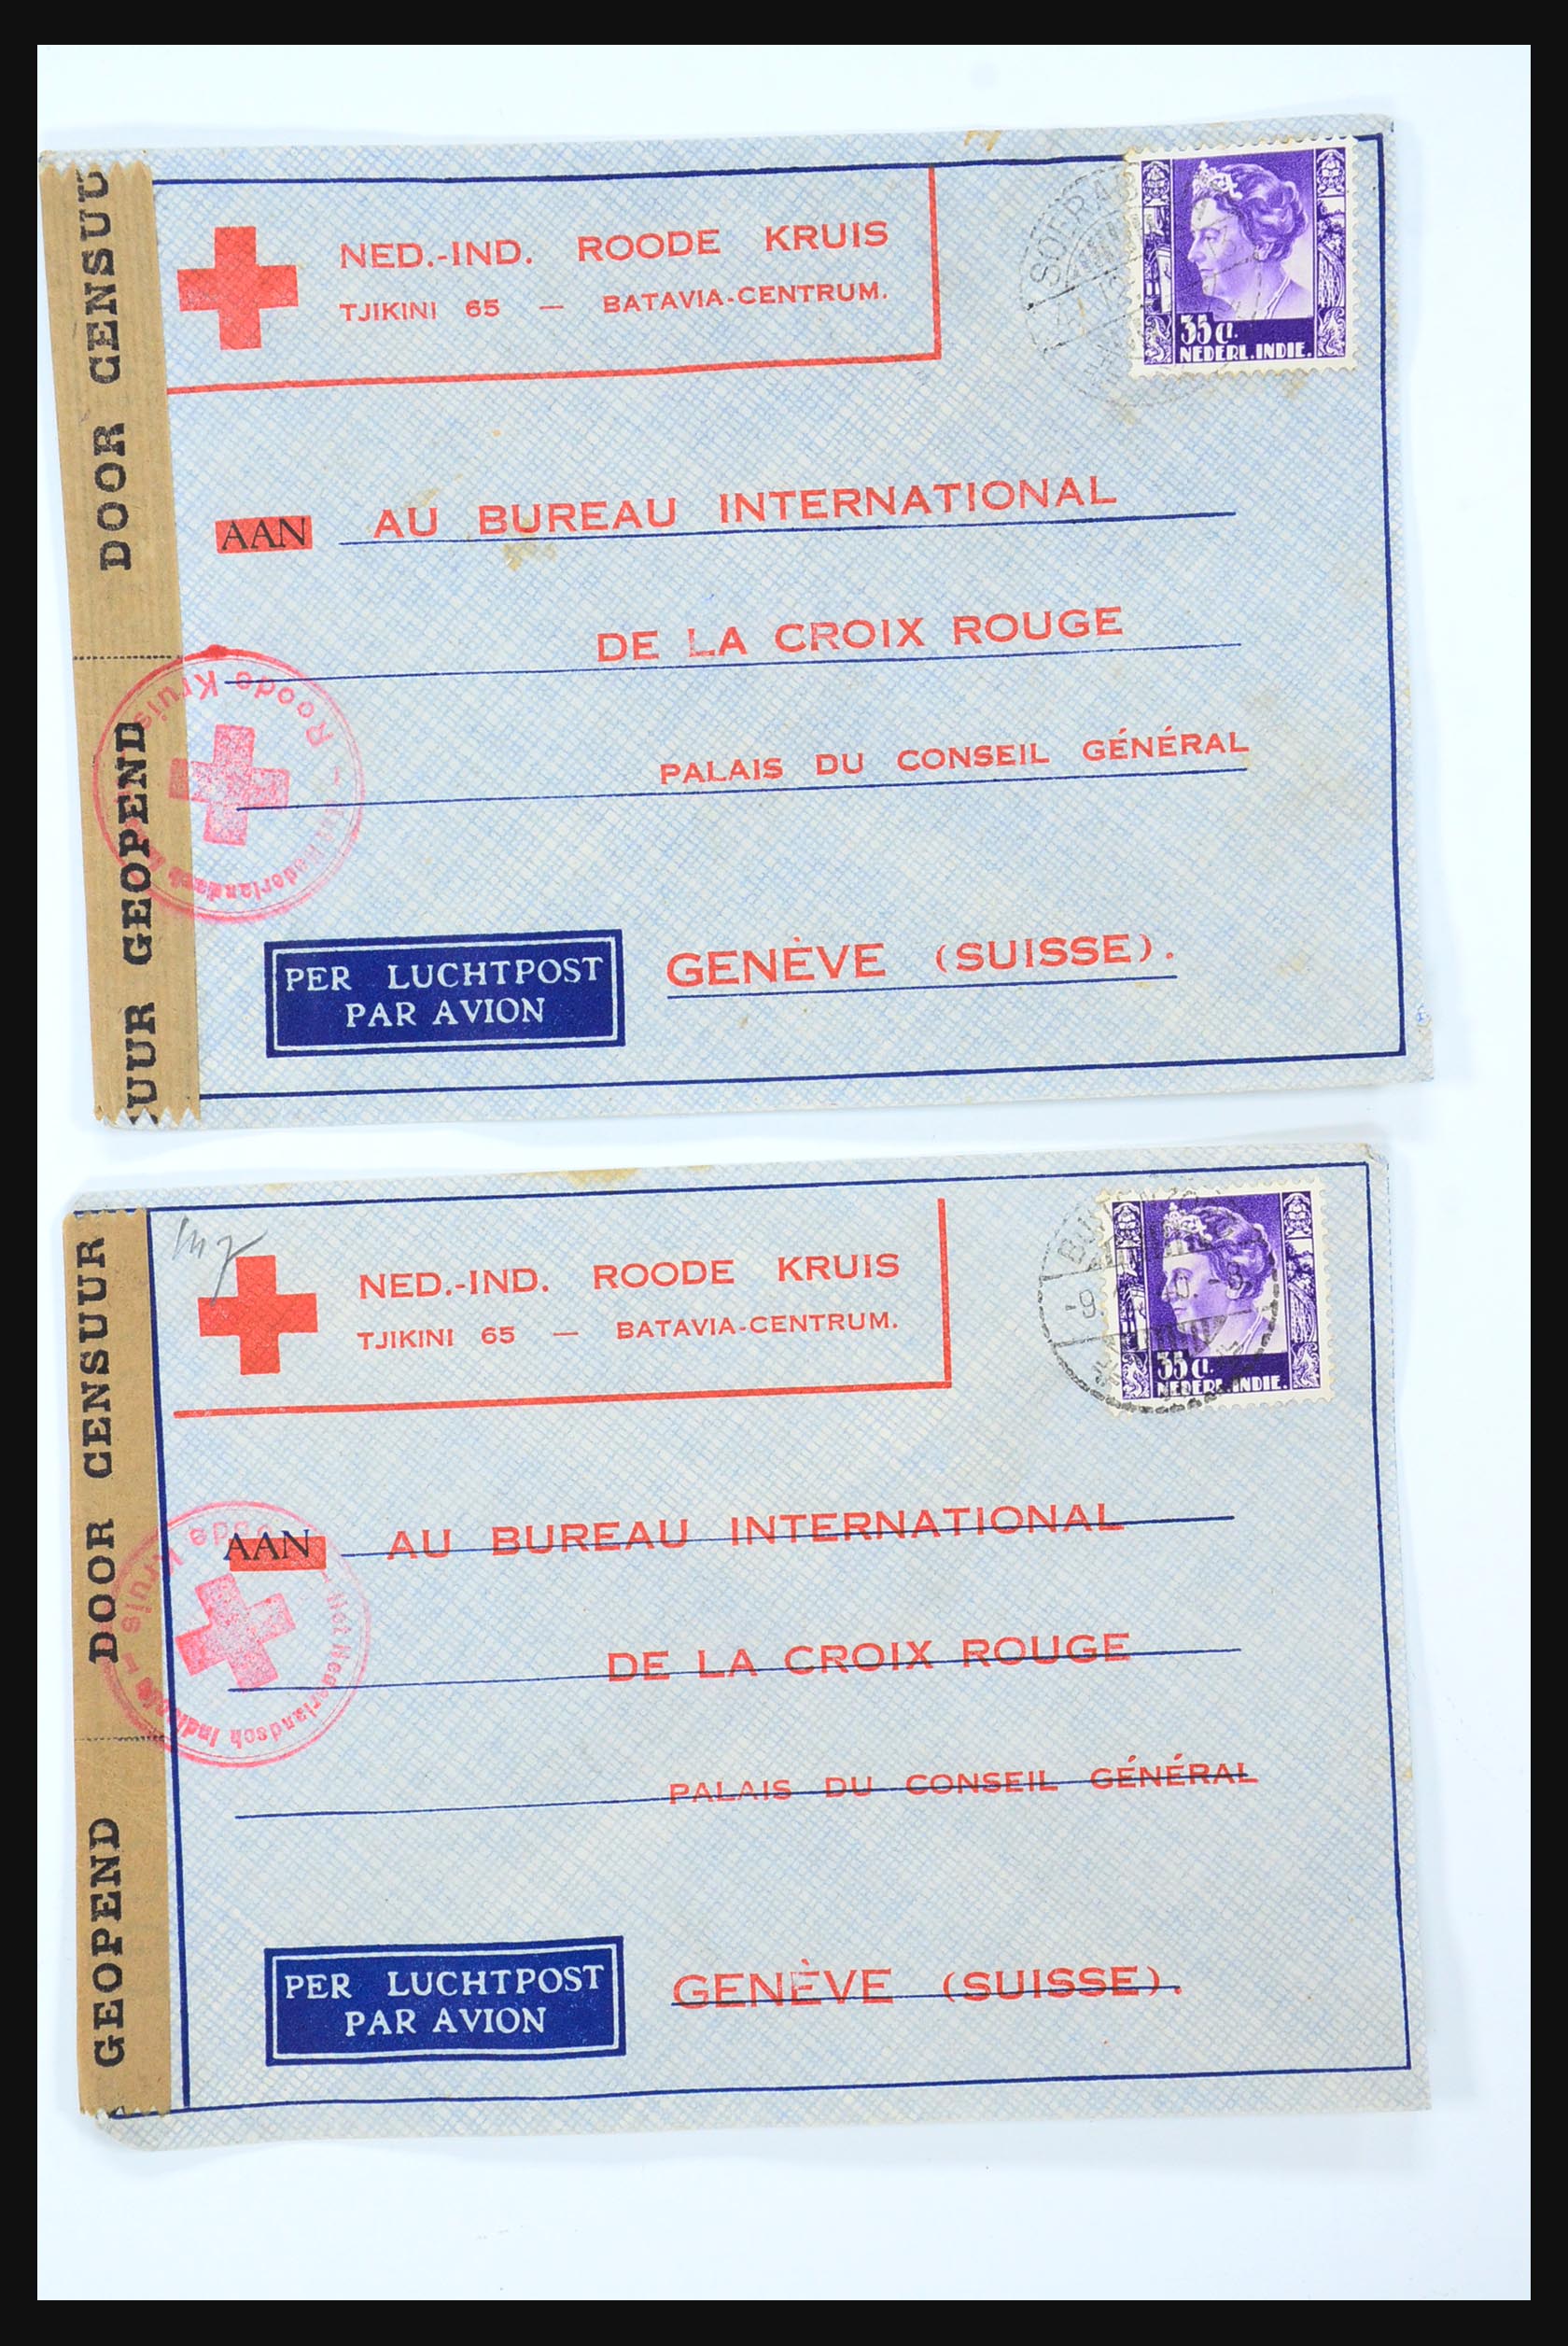 31362 083 - 31362 Netherlands Indies Japanese occupation covers 1942-1945.